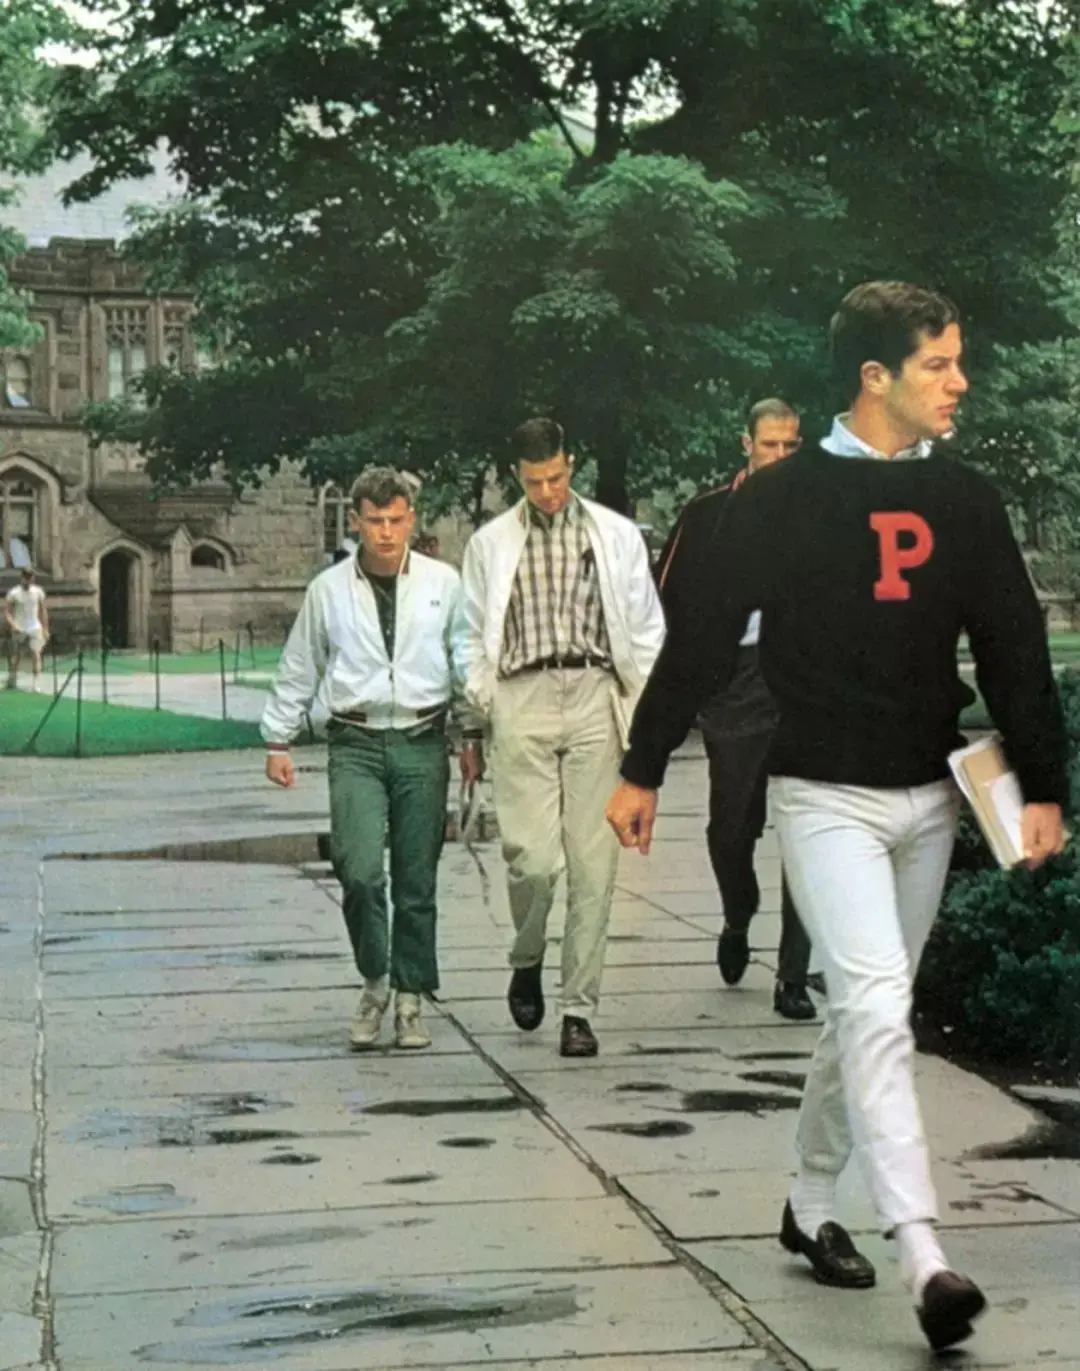 An Ivy League student wearing a pair of loafers